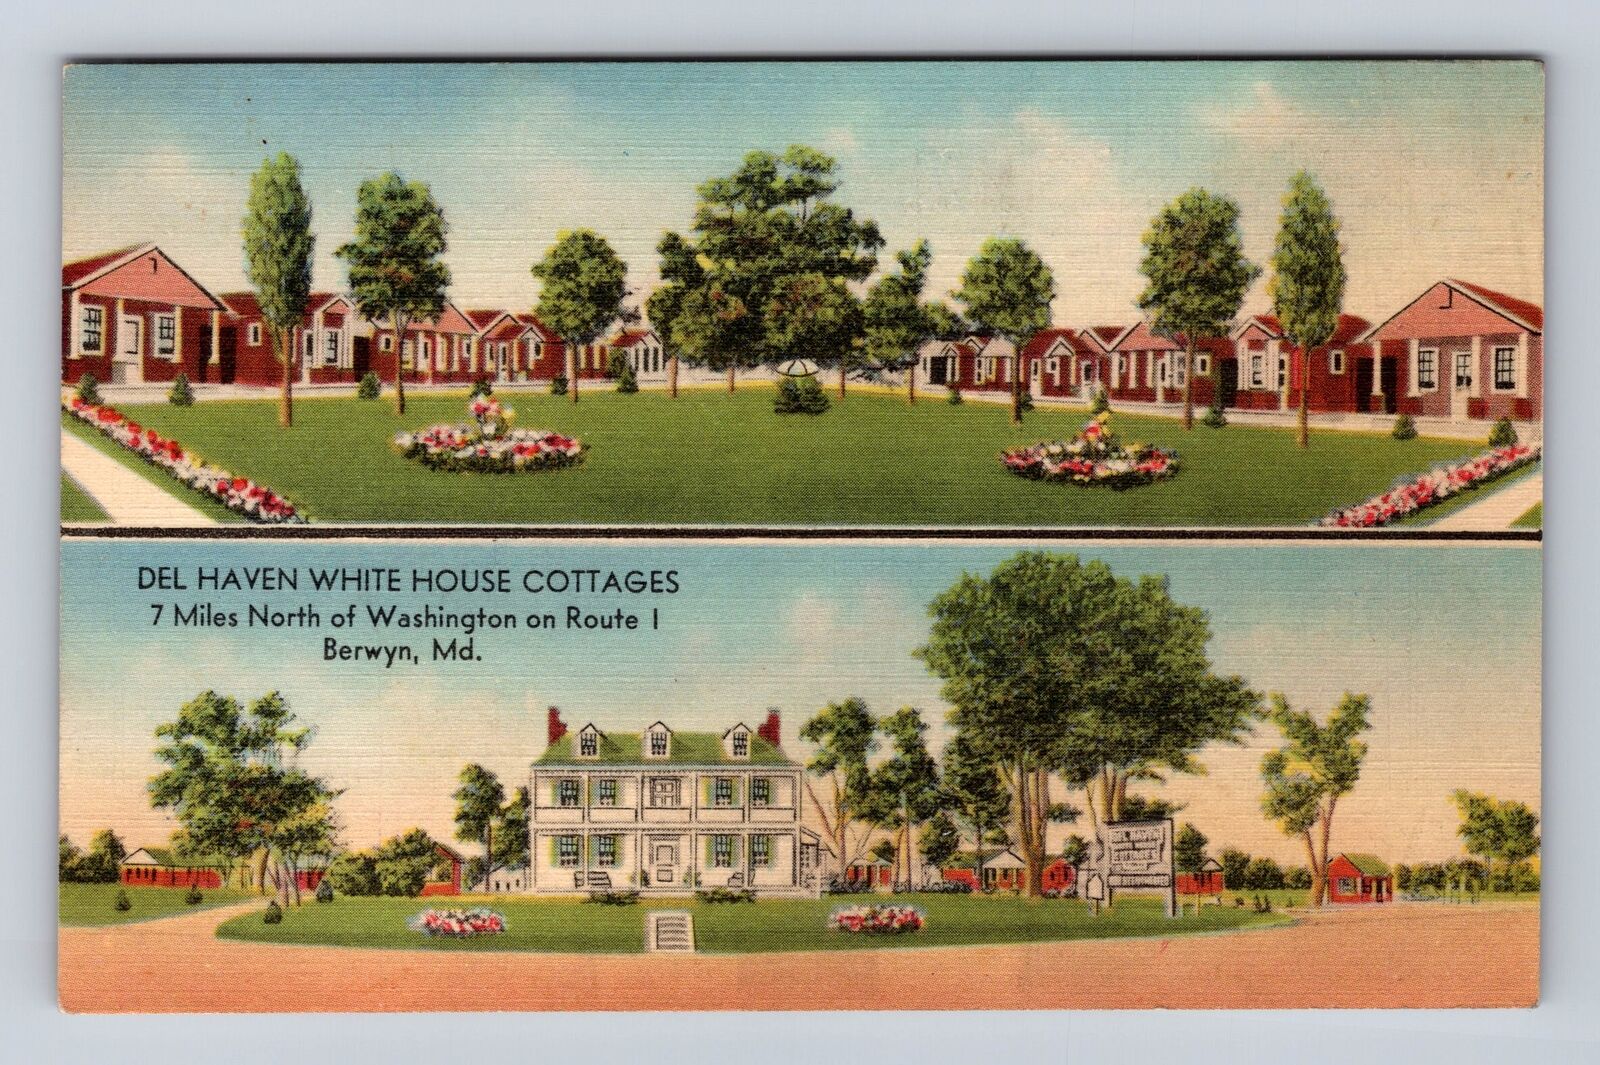 Berwyn MD-Maryland, Del Haven White House Cottages Advertising Vintage Postcard